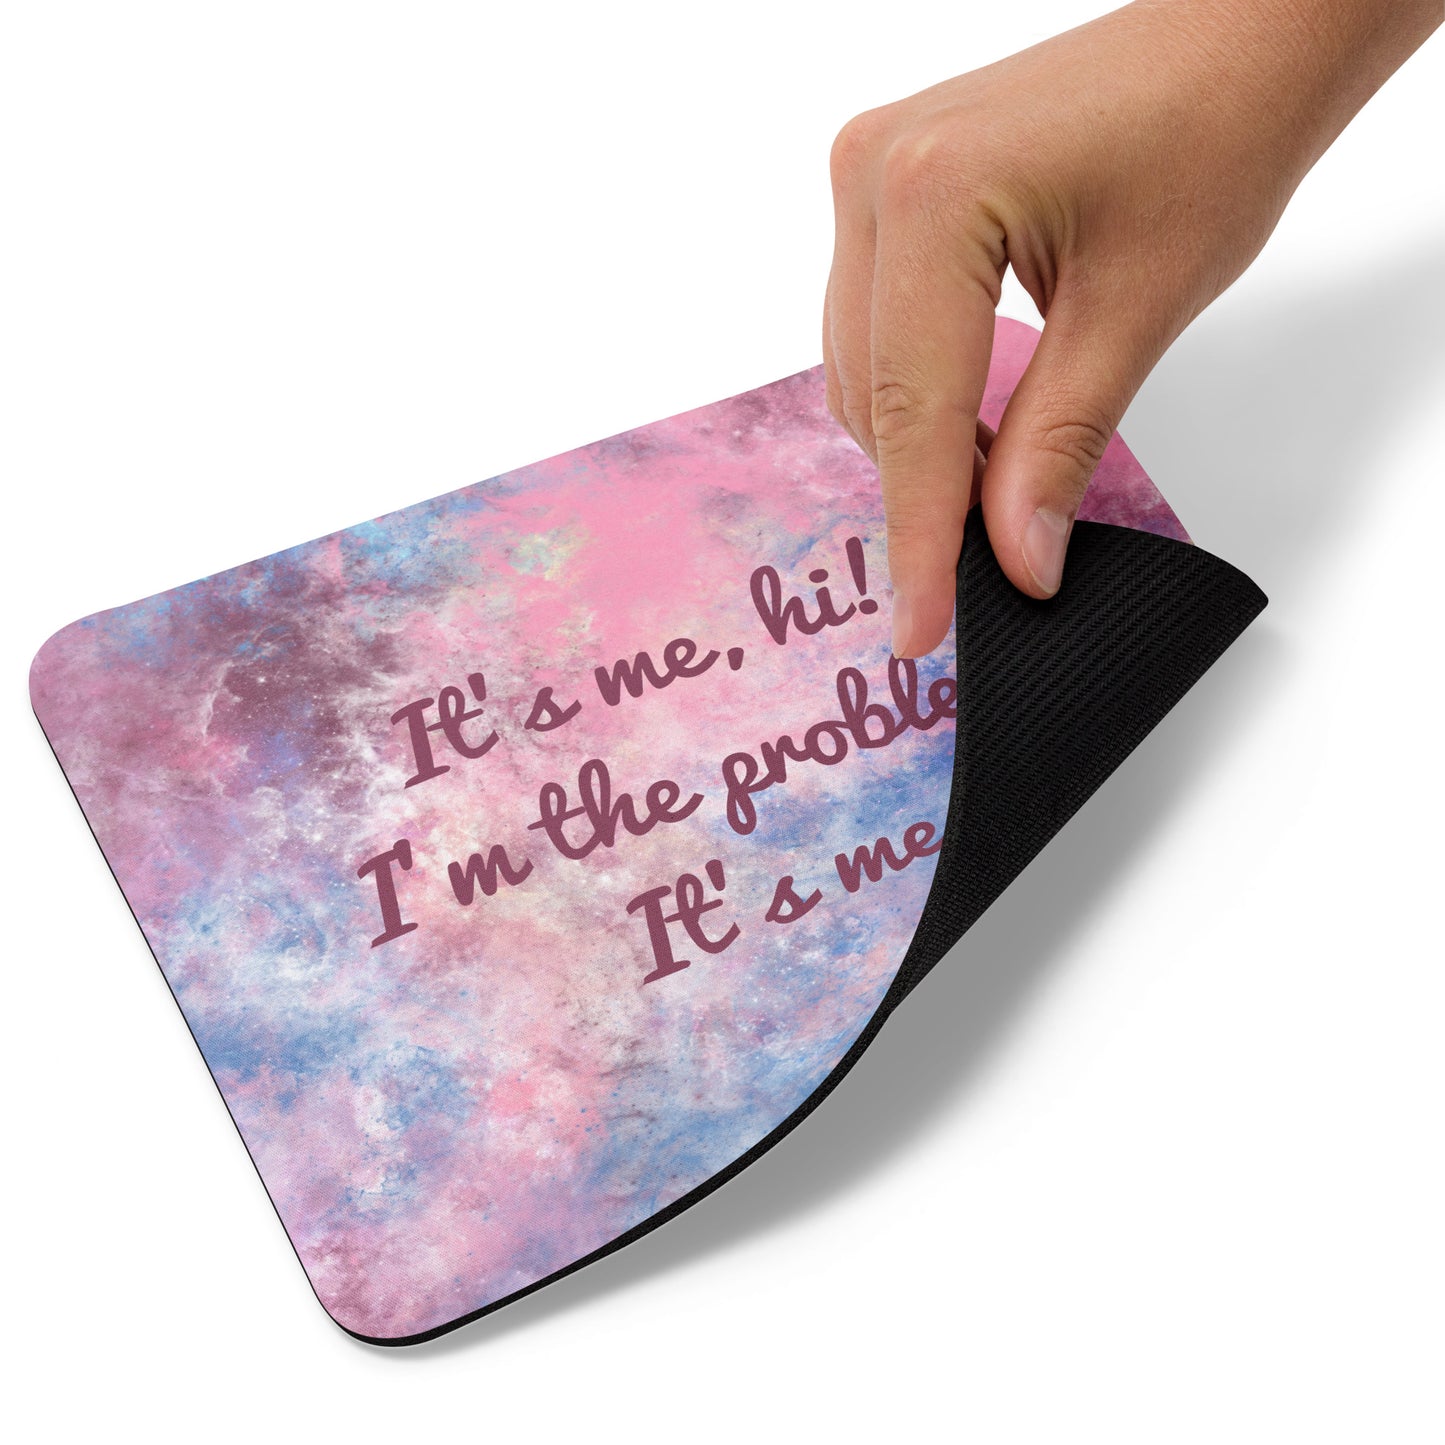 A blue, pink, and white mouse pad with the quote It's me, hi! I'm the problem, it's me. The bottom right corner of the mouse pad is lifted up.